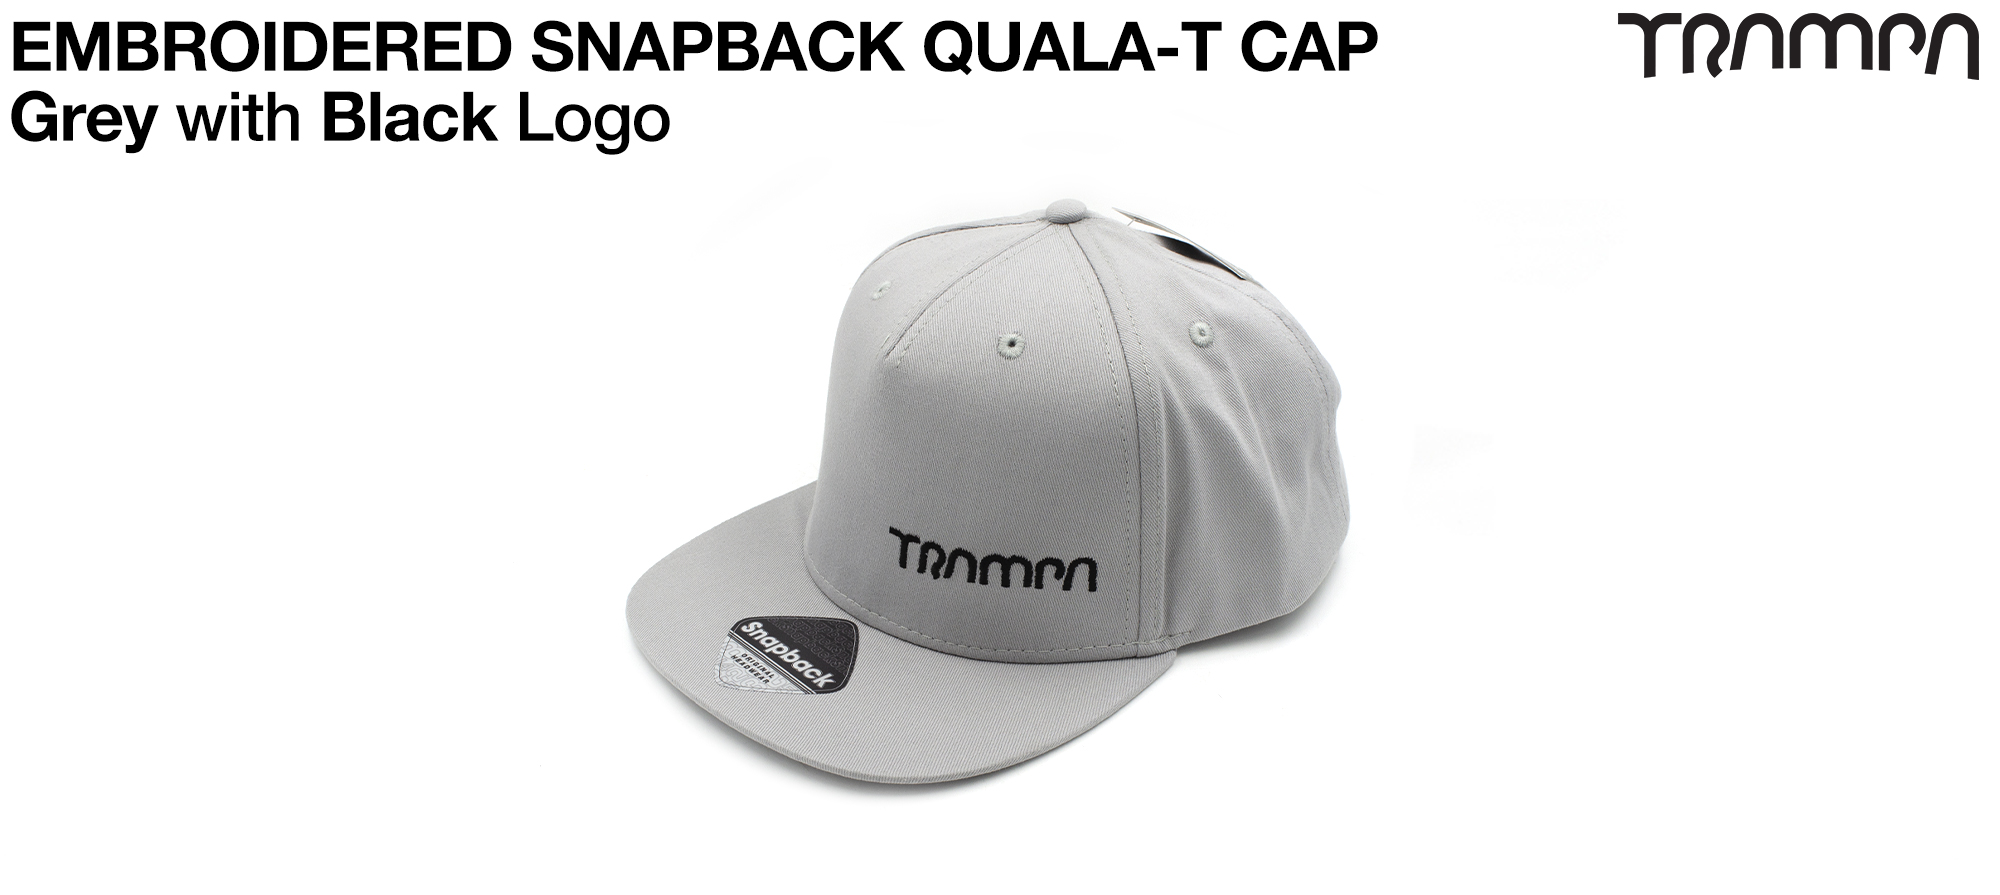 Light GREY SNAPBACK Cap with BLACK embroidered TRAMPA logo